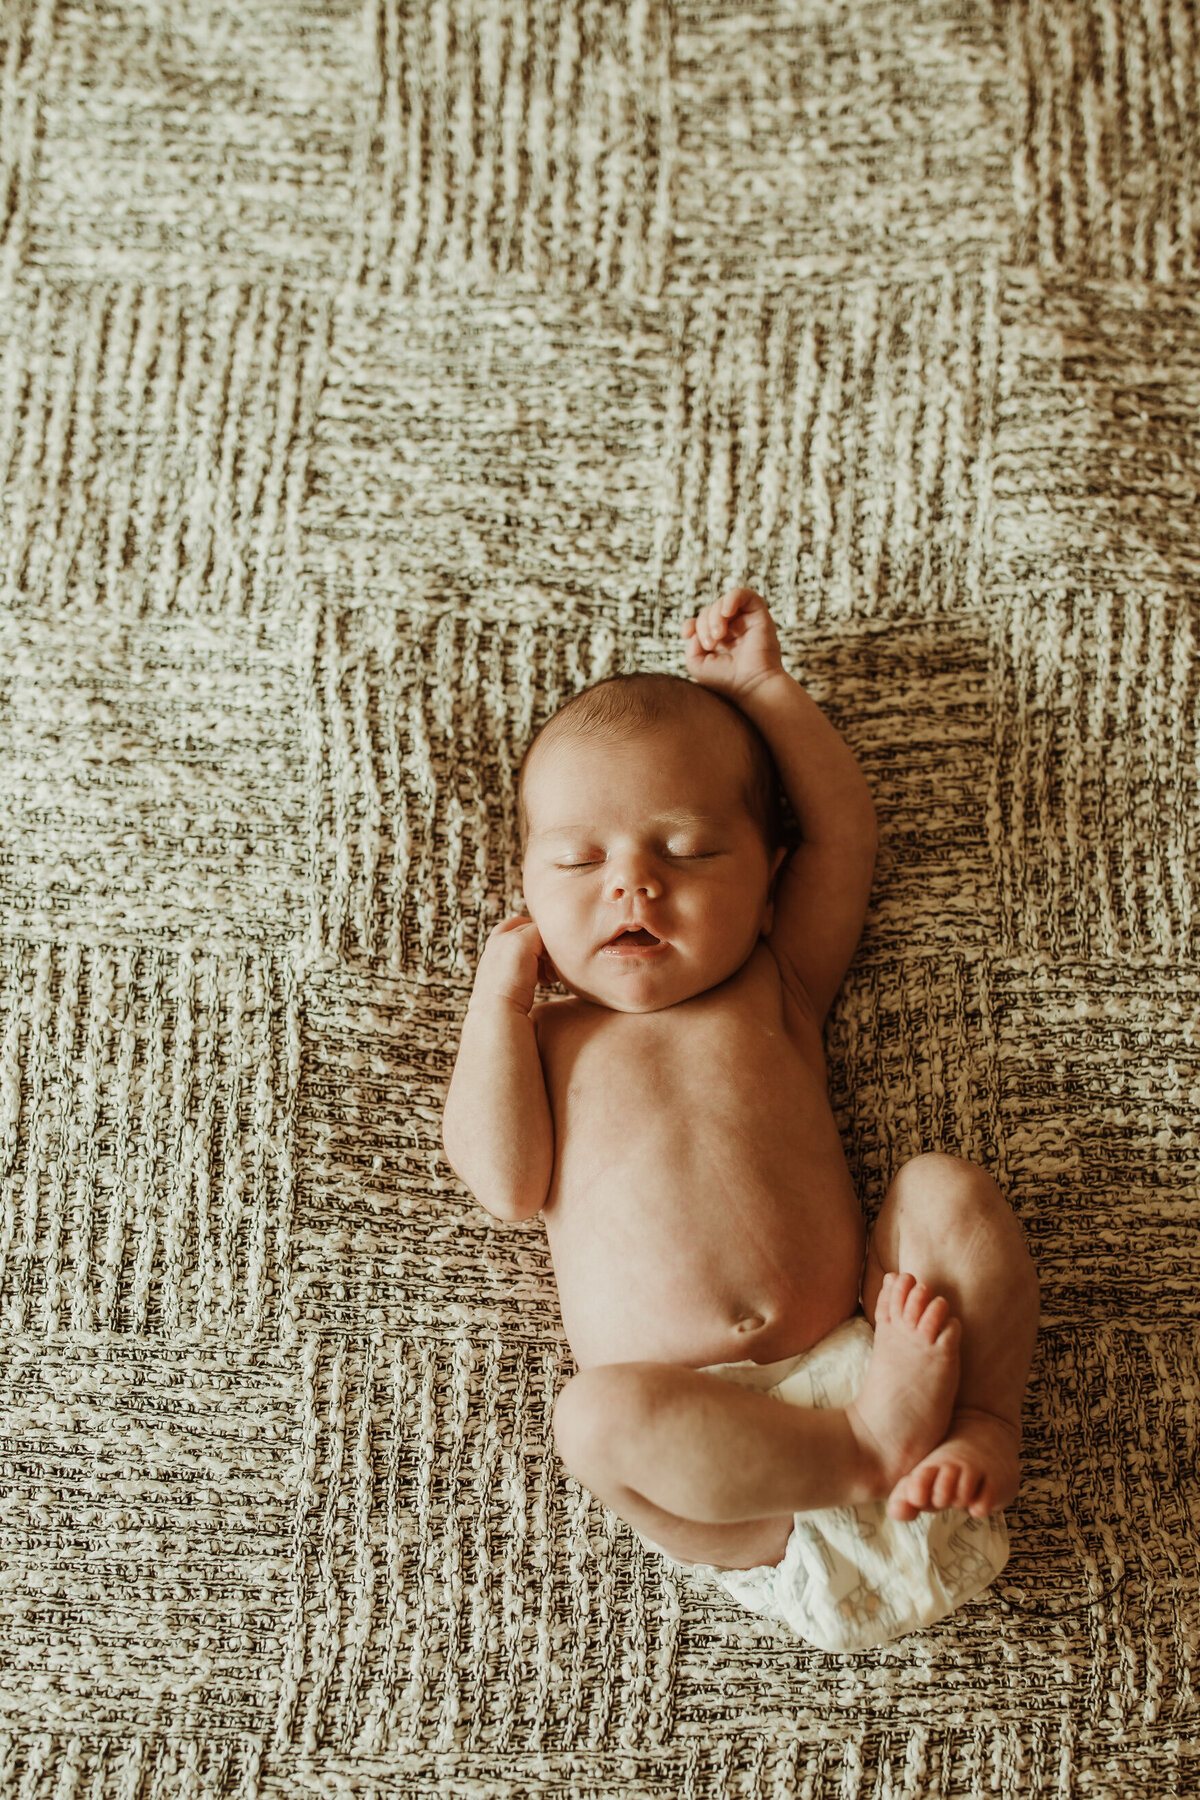 Infant in diaper on textured backdrop stretching one arm